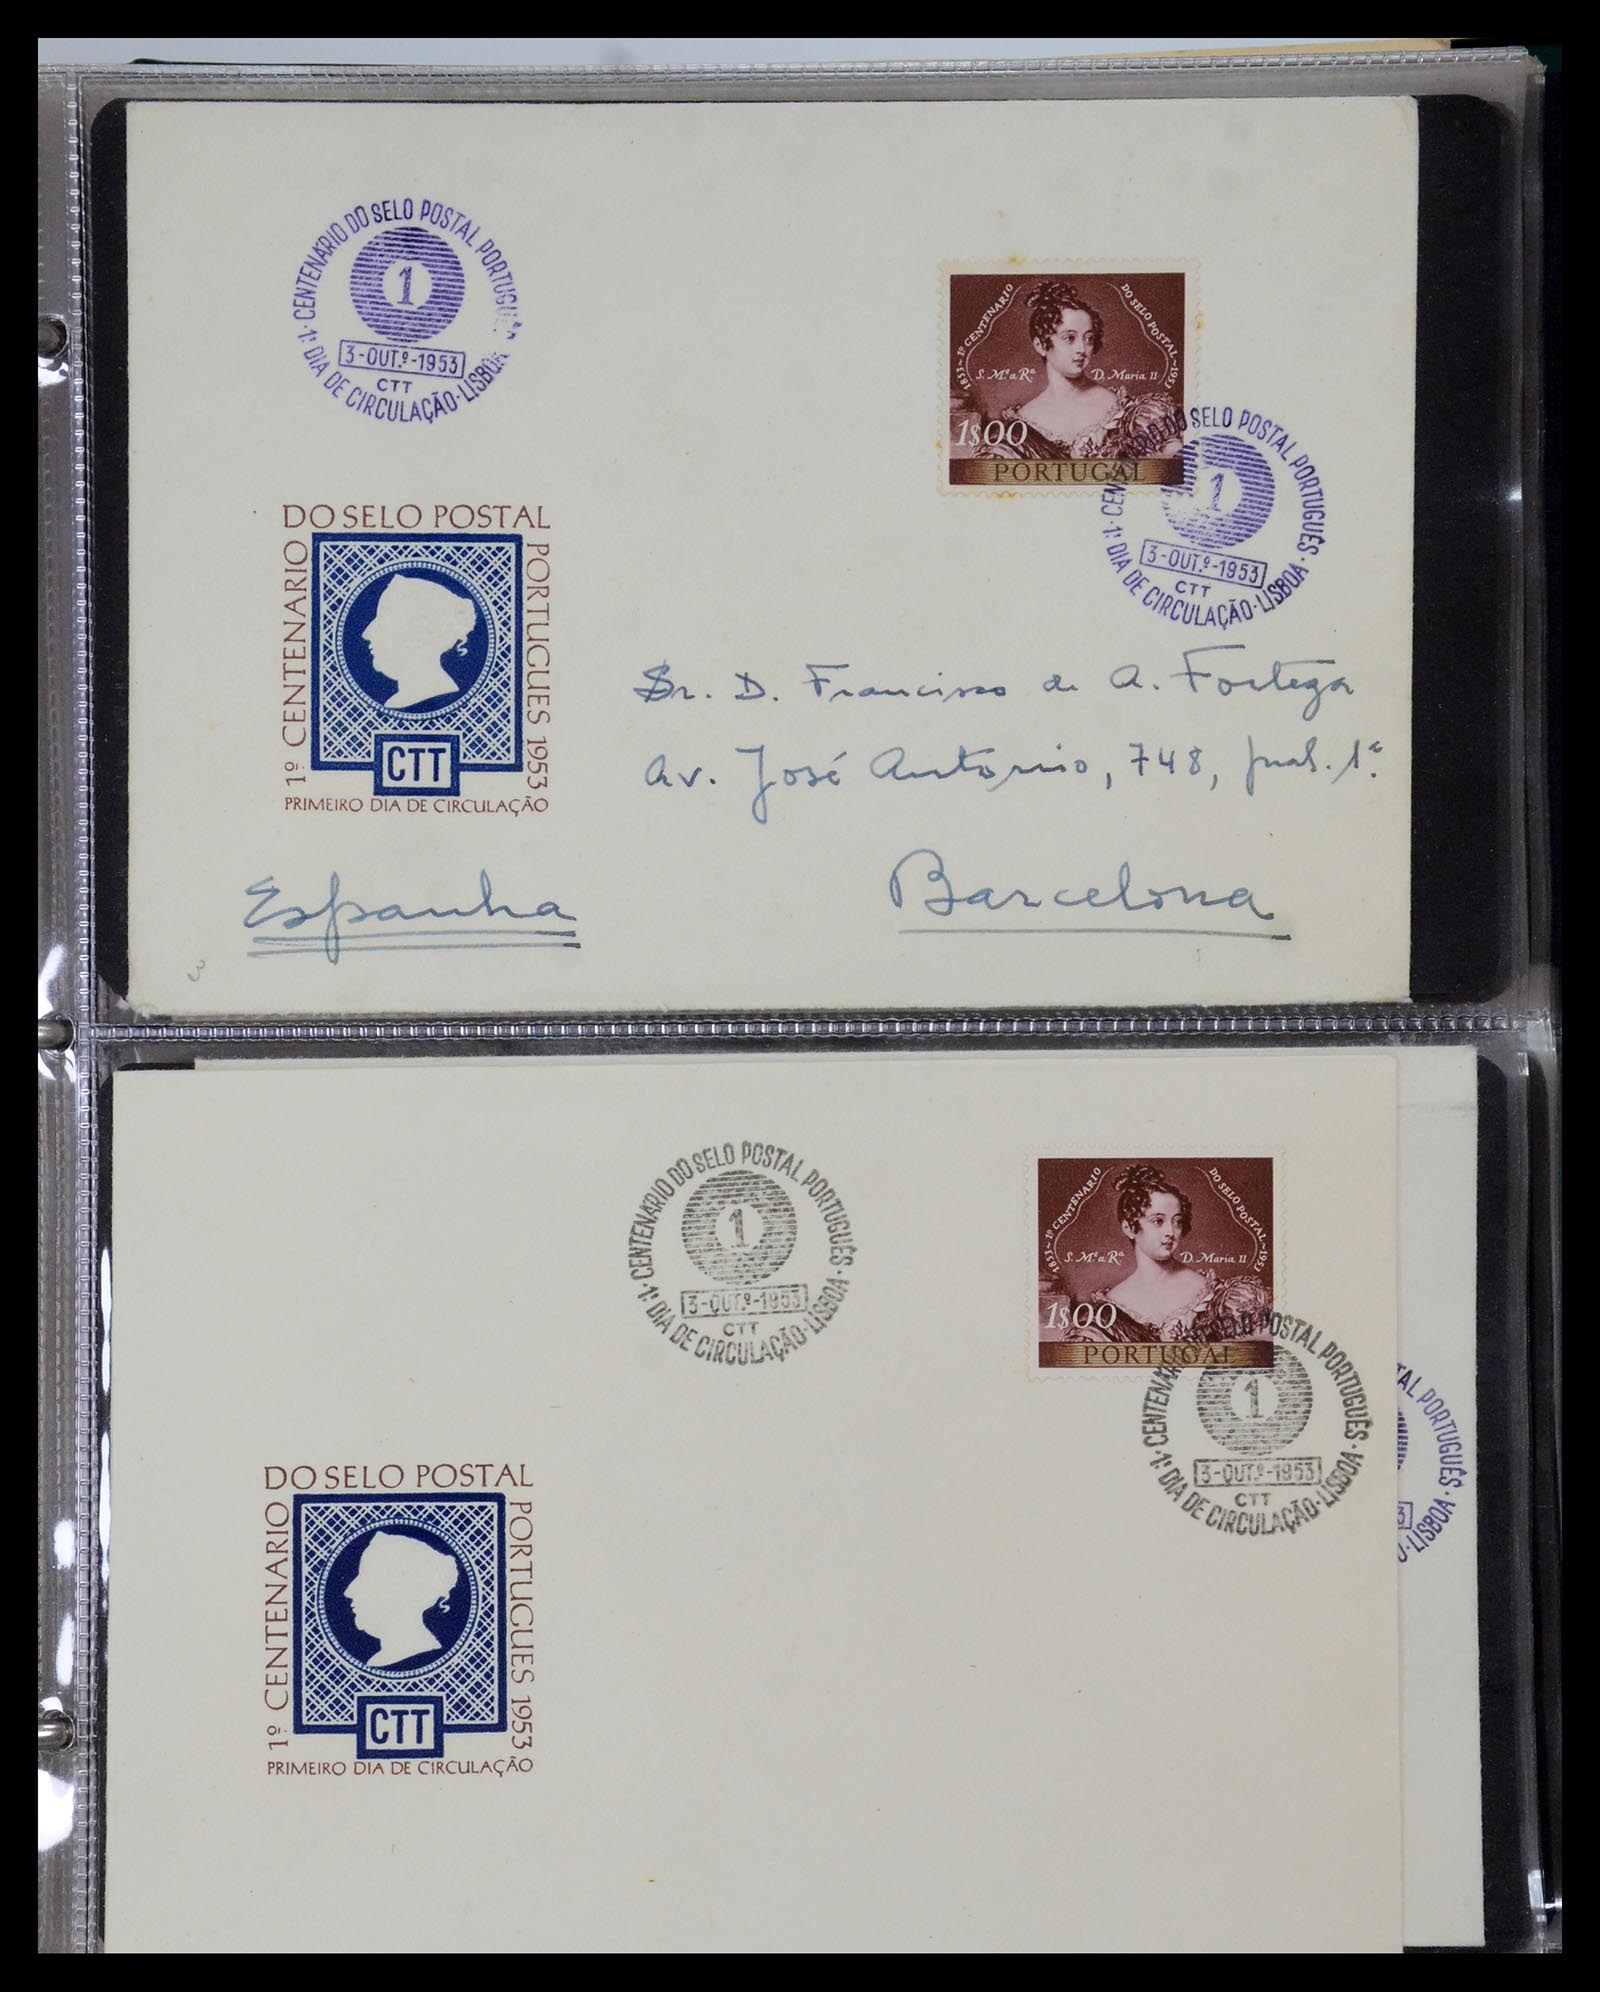 35736 020 - Stamp Collection 35736 World airmail covers.